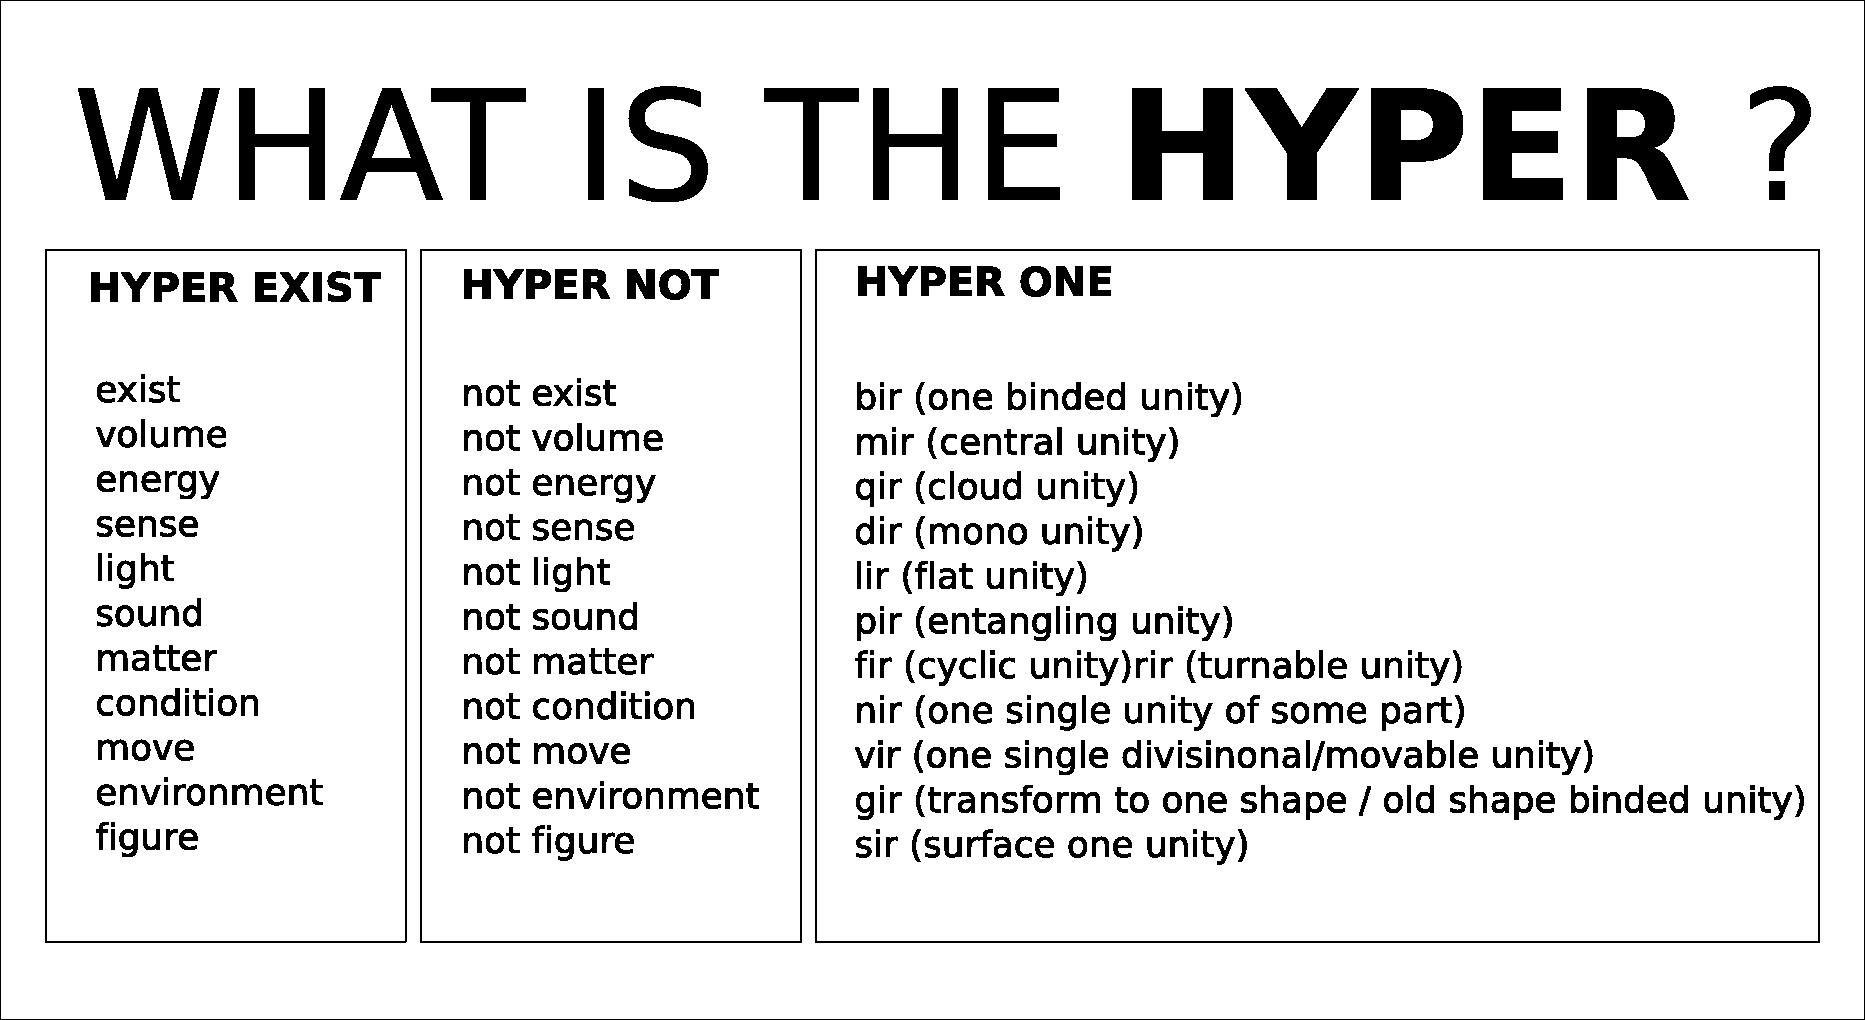 What is the hyper?